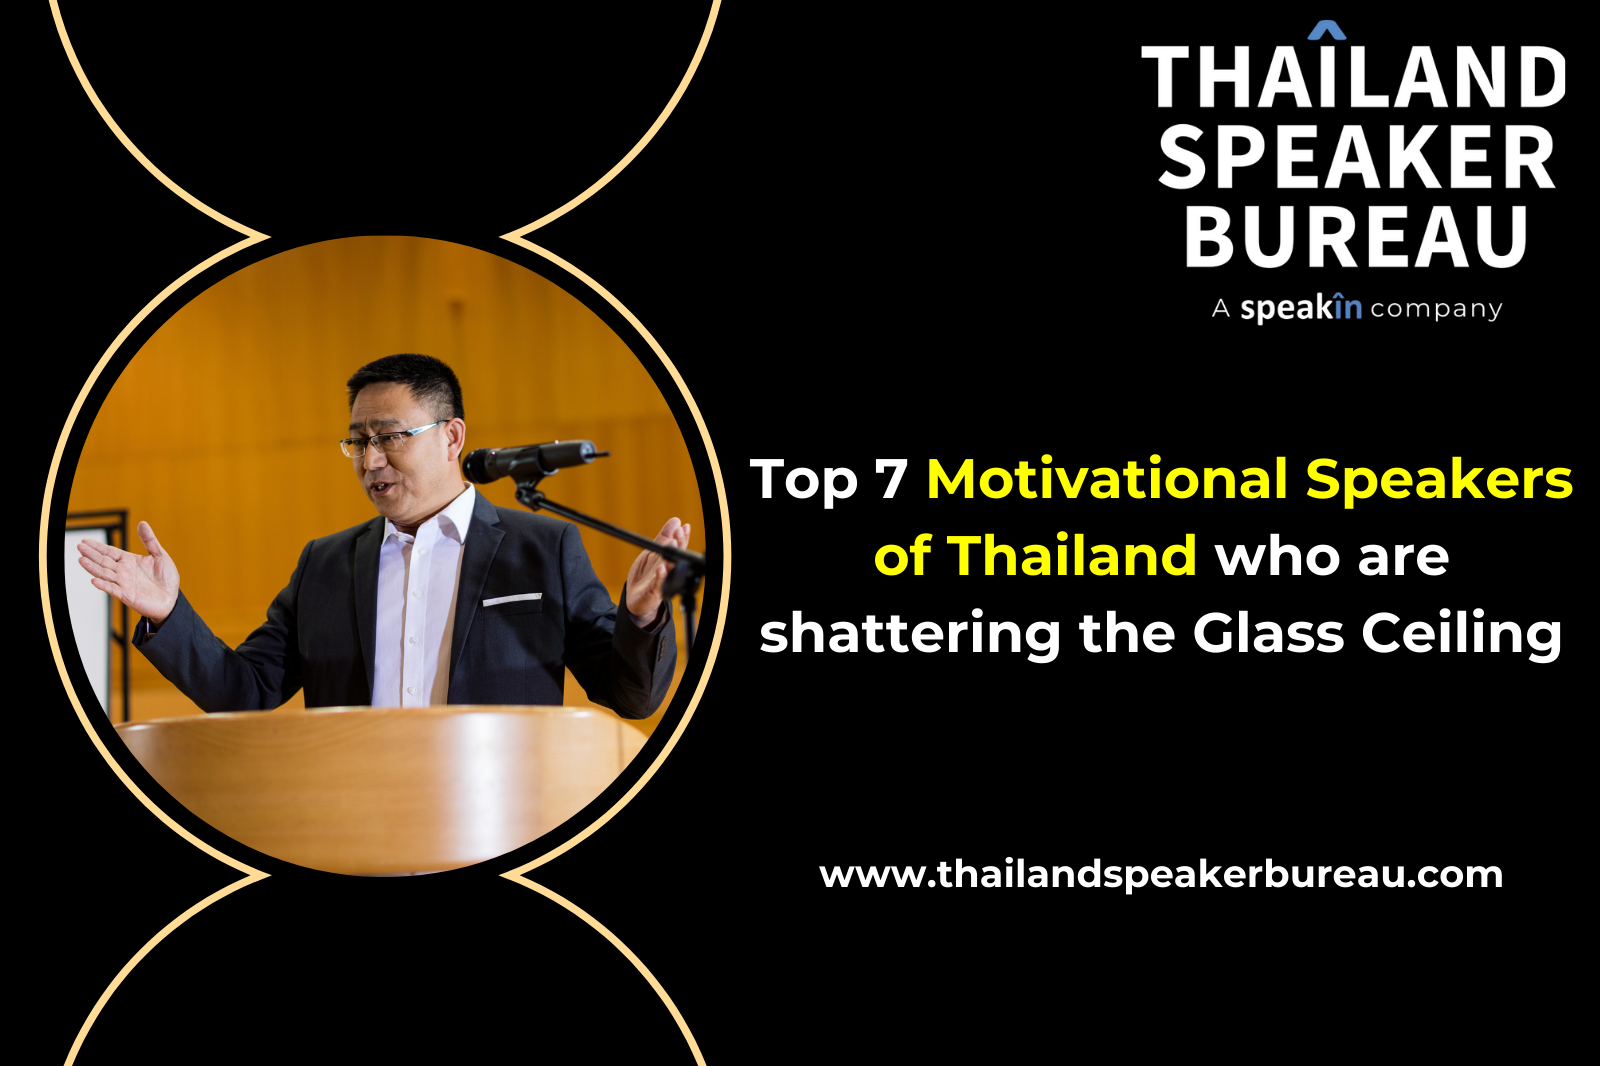 Top 7 Motivational Speakers of Thailand who are shattering the Glass Ceiling